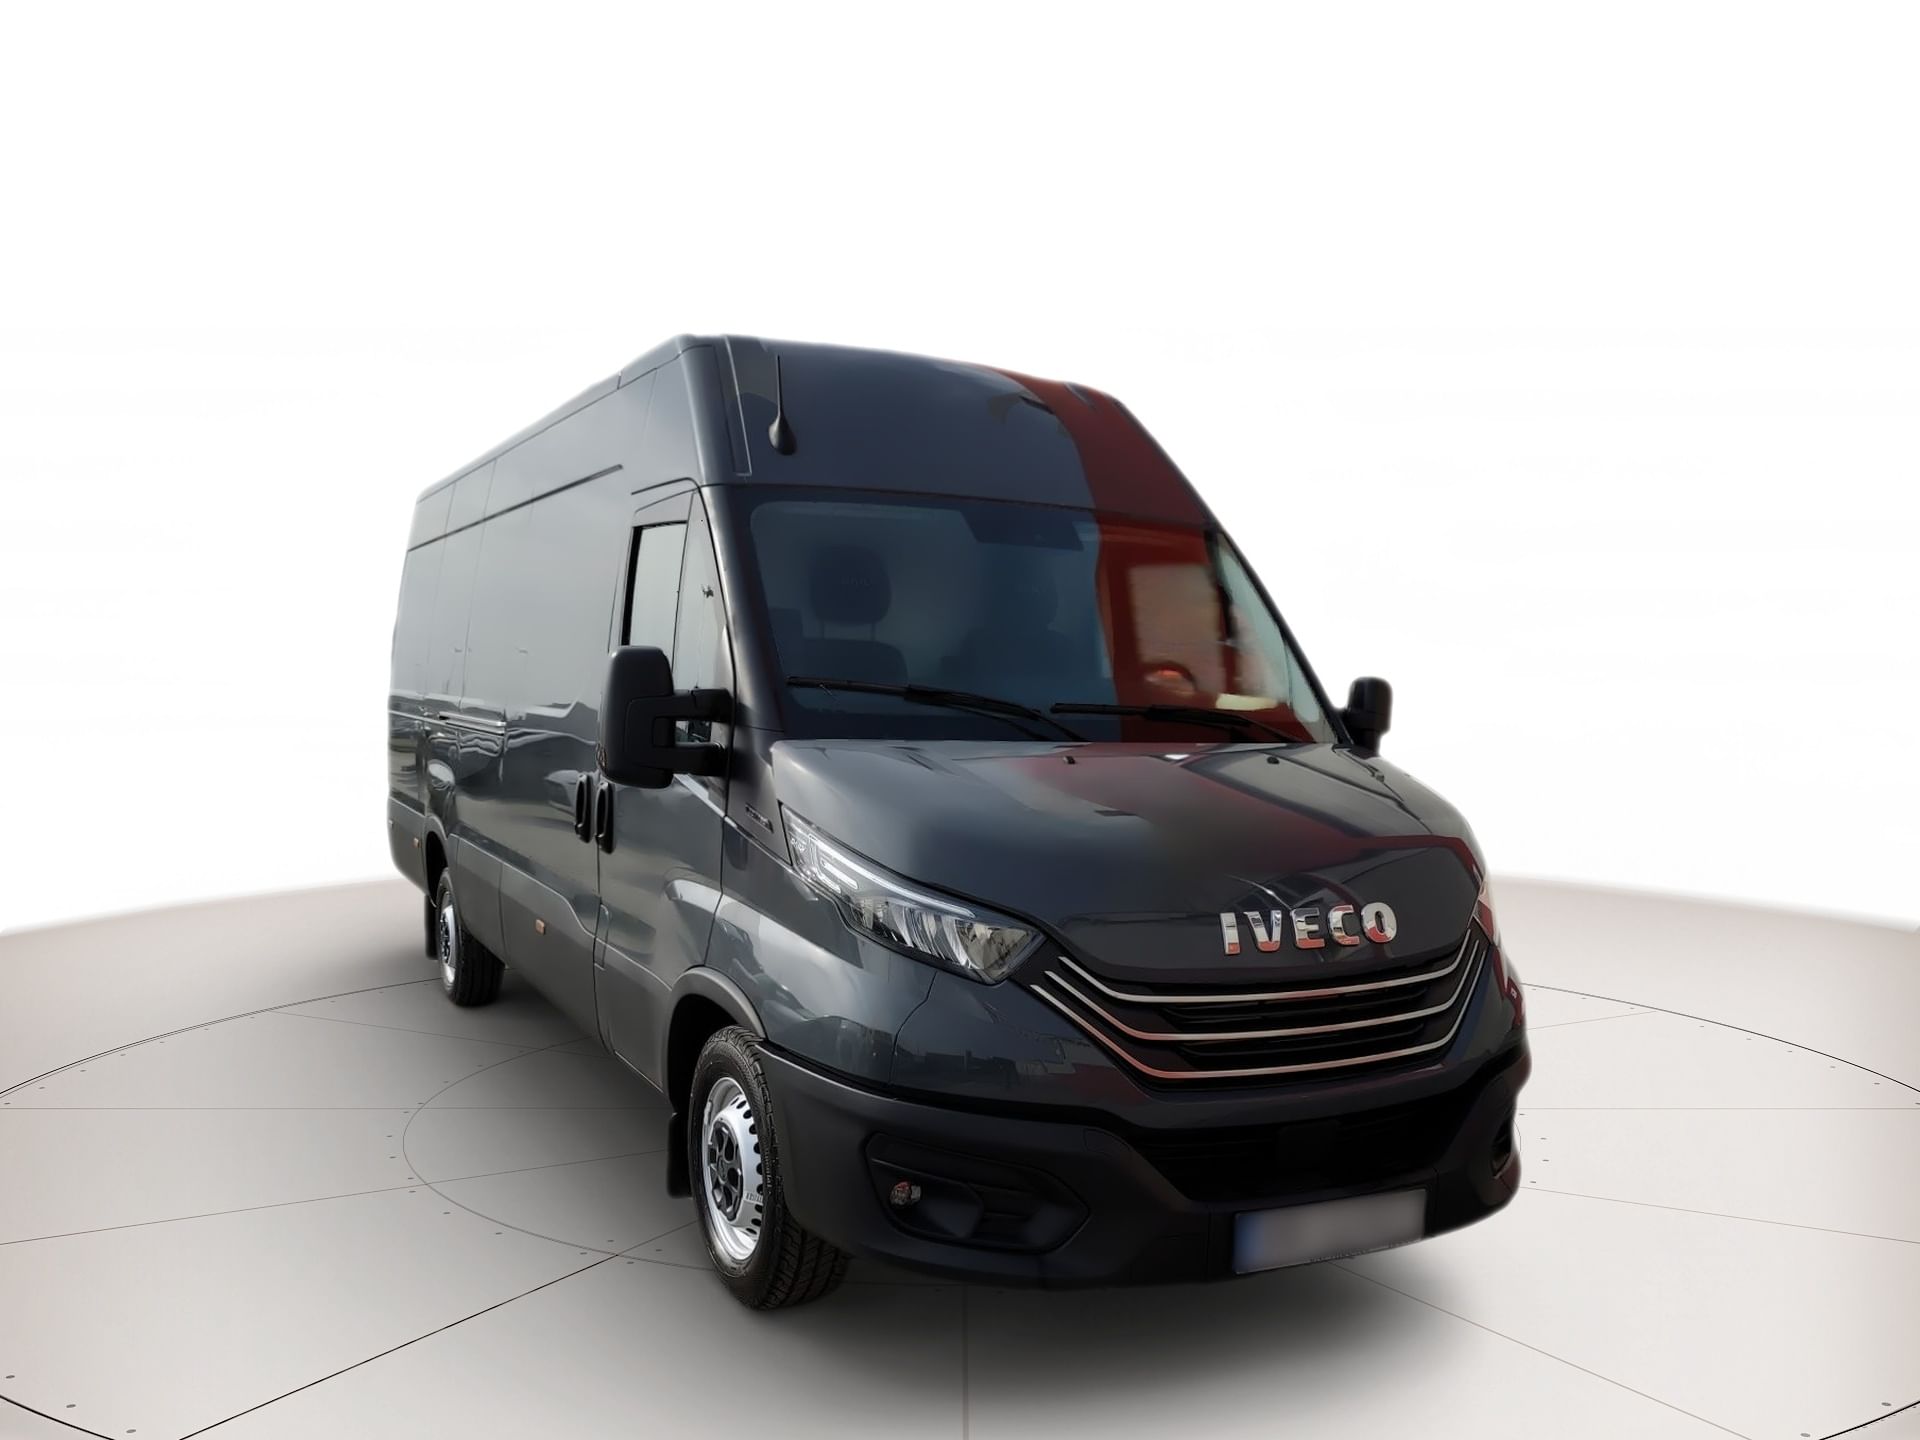 Iveco Daily CRV 2.3 HPT